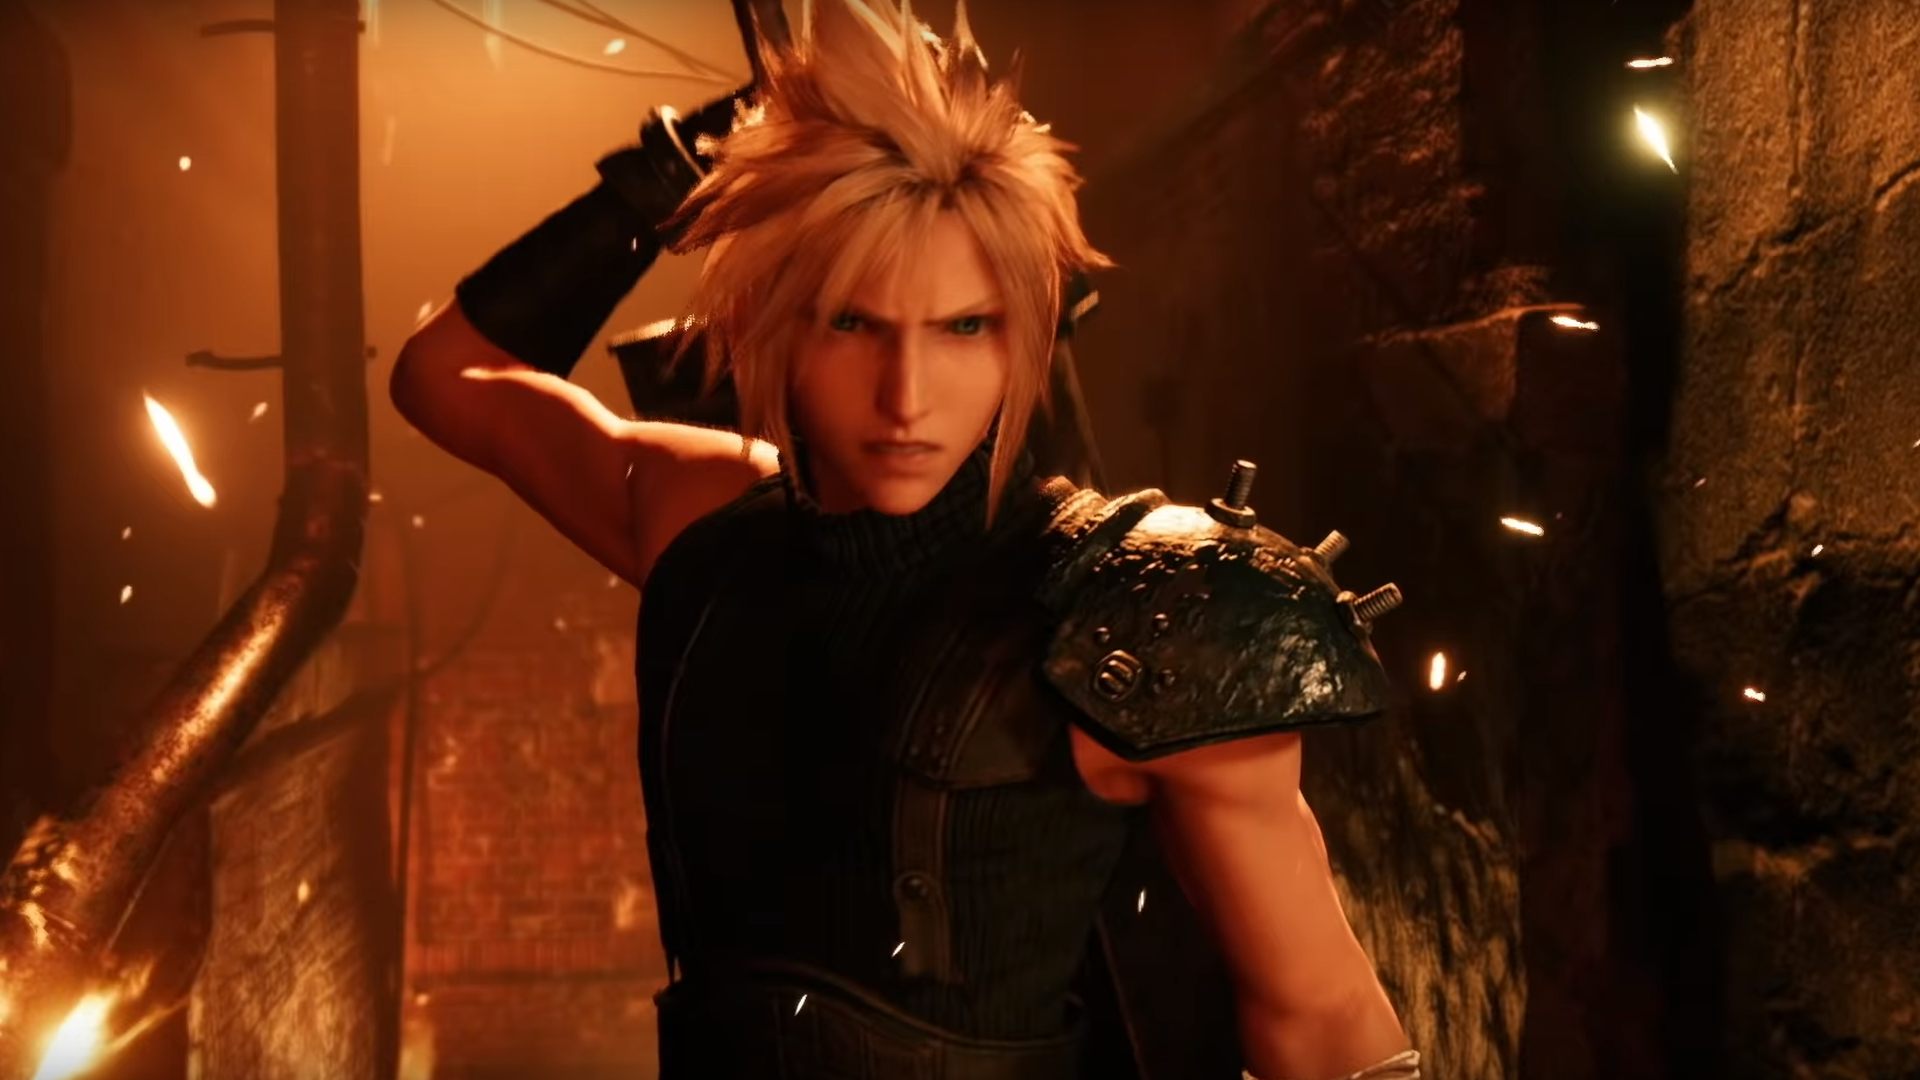 Cloud about to draw his sword in a burning alley.